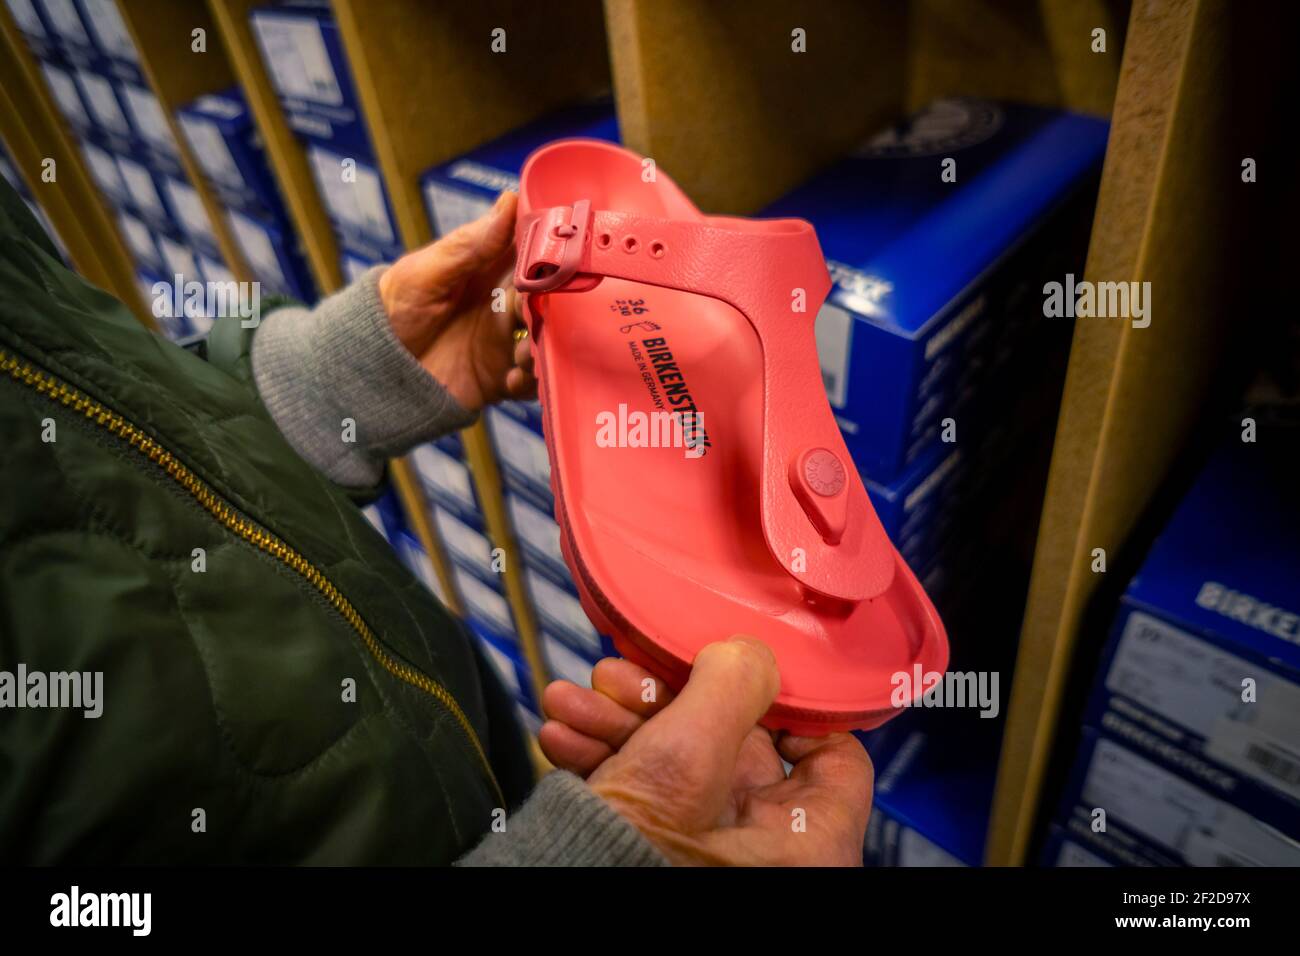 A shopper peruses the Birkenstock sandals displayed in a shoe store in New York on Friday, February 26, 2021. The French luxury brand LVMH has purchased a majority stake in the German sandal cobbler Birkenstock in a deal worth €4bn. (© Richard B. Levine) Stock Photo